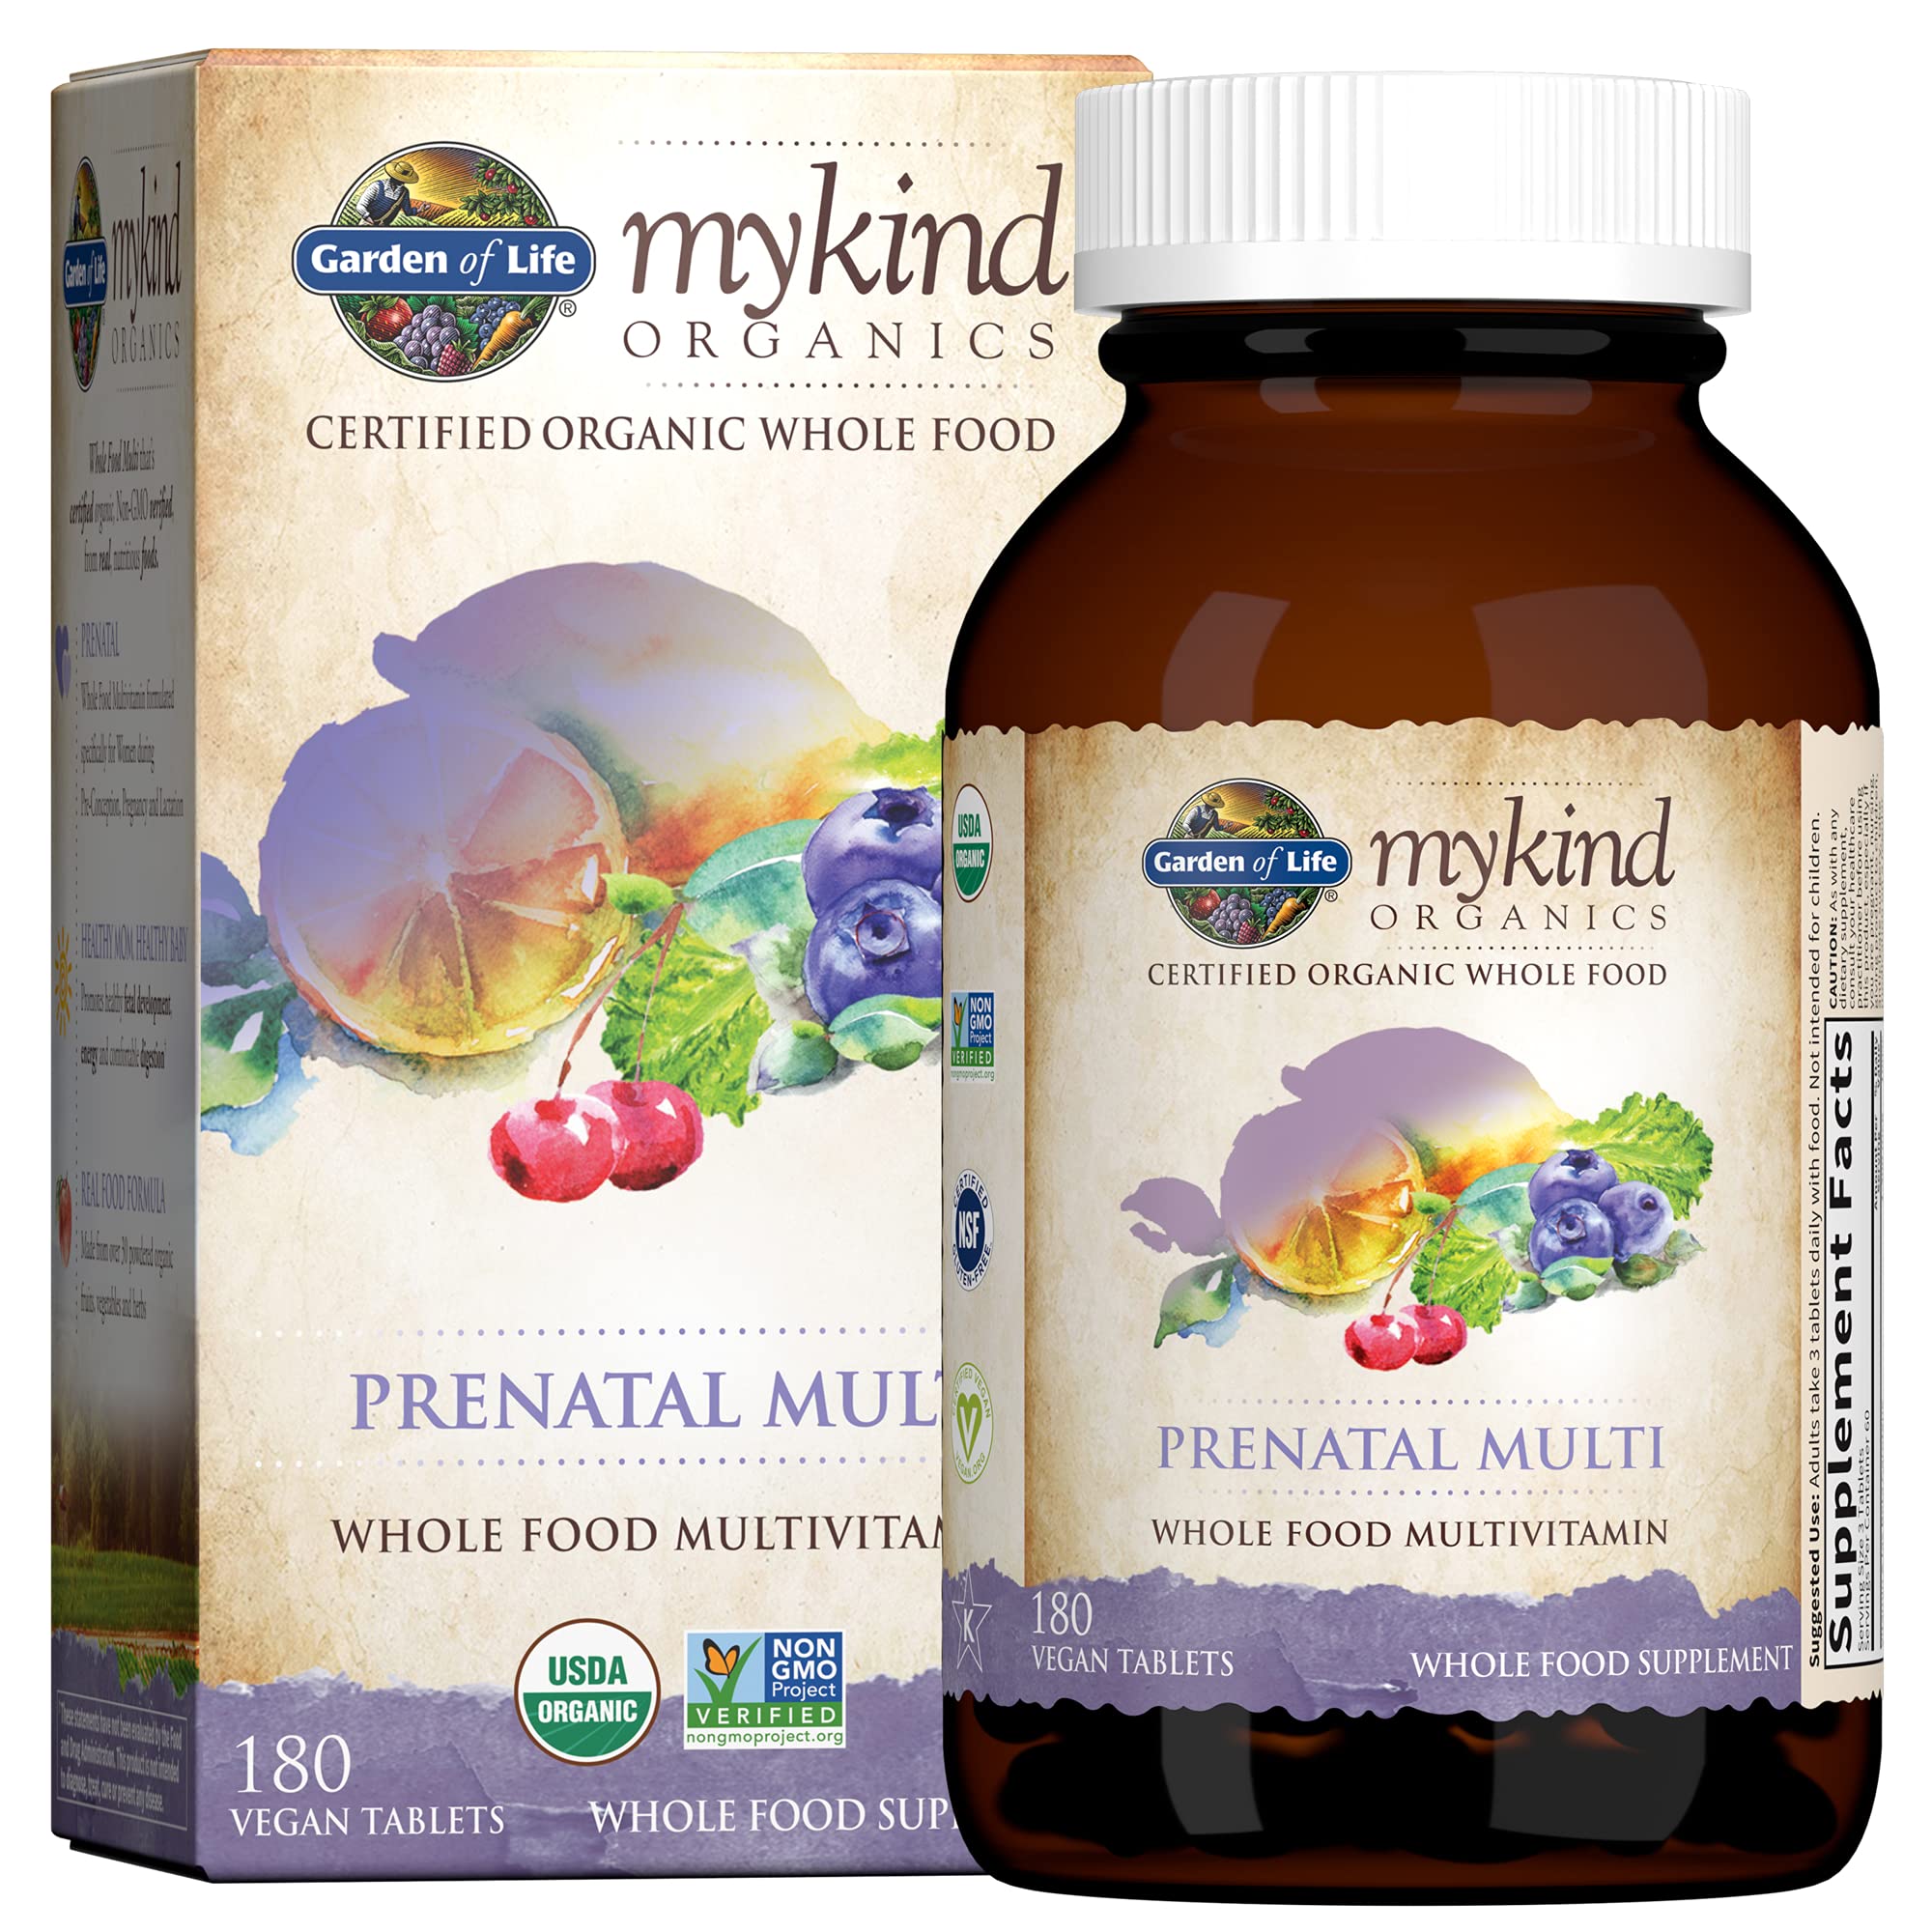 Garden of Life Mykind Organics Prenatal Vegan Whole Food Multivitamin Tablets, Folate not Folic Acid & Stomach Soothing Blend for Women, Peppermint...